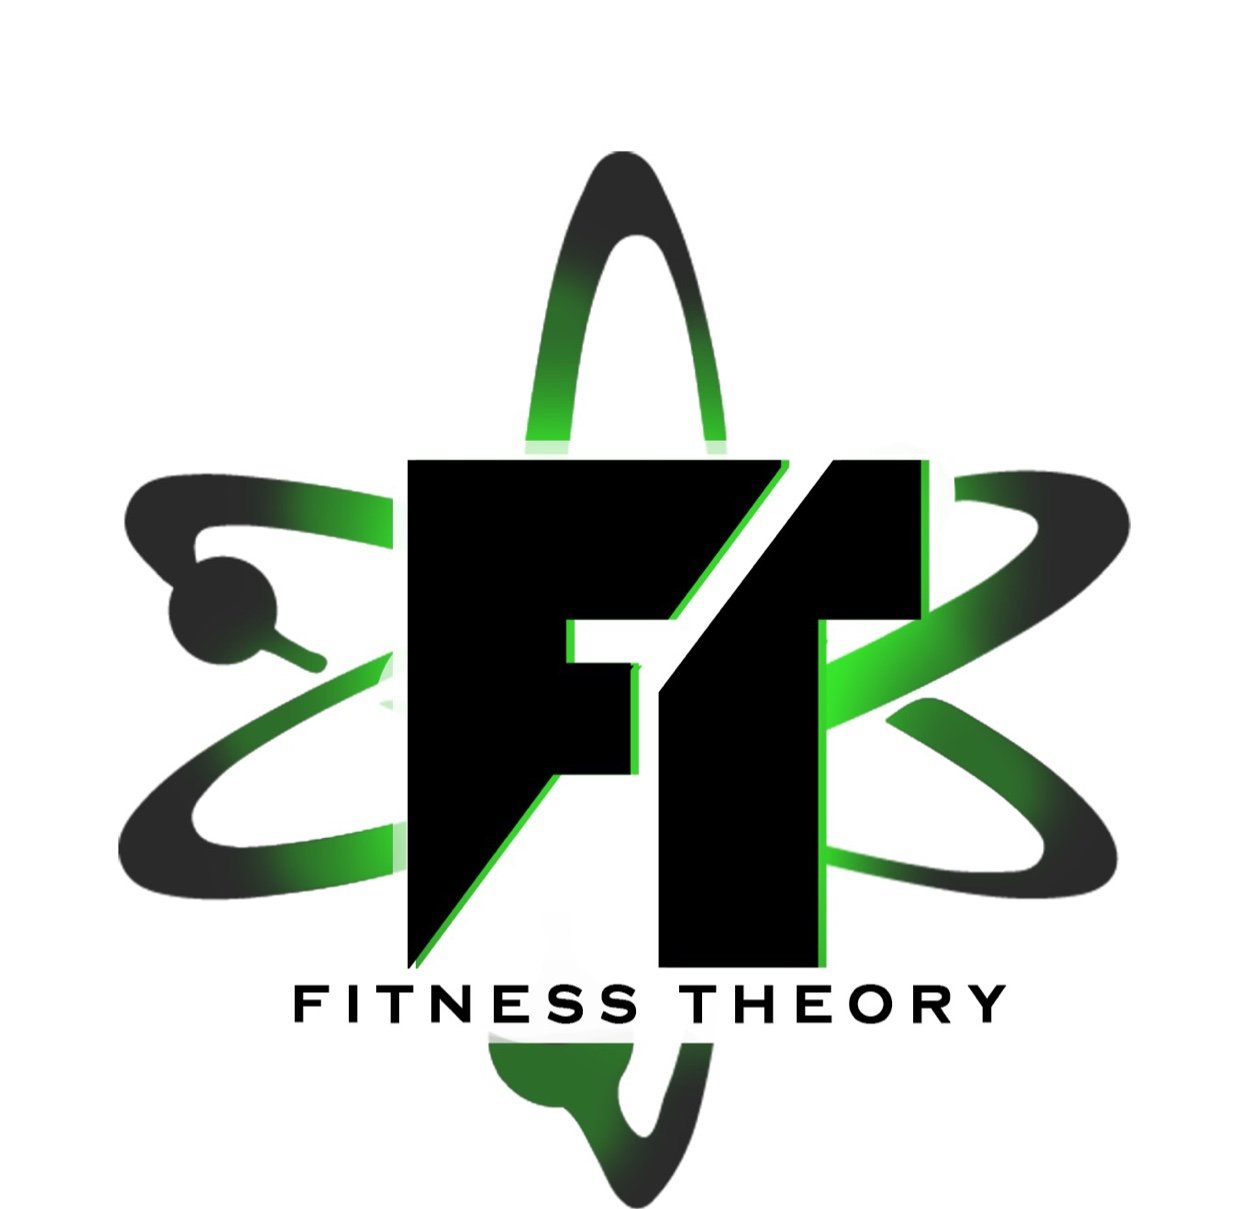 Fitness Theory